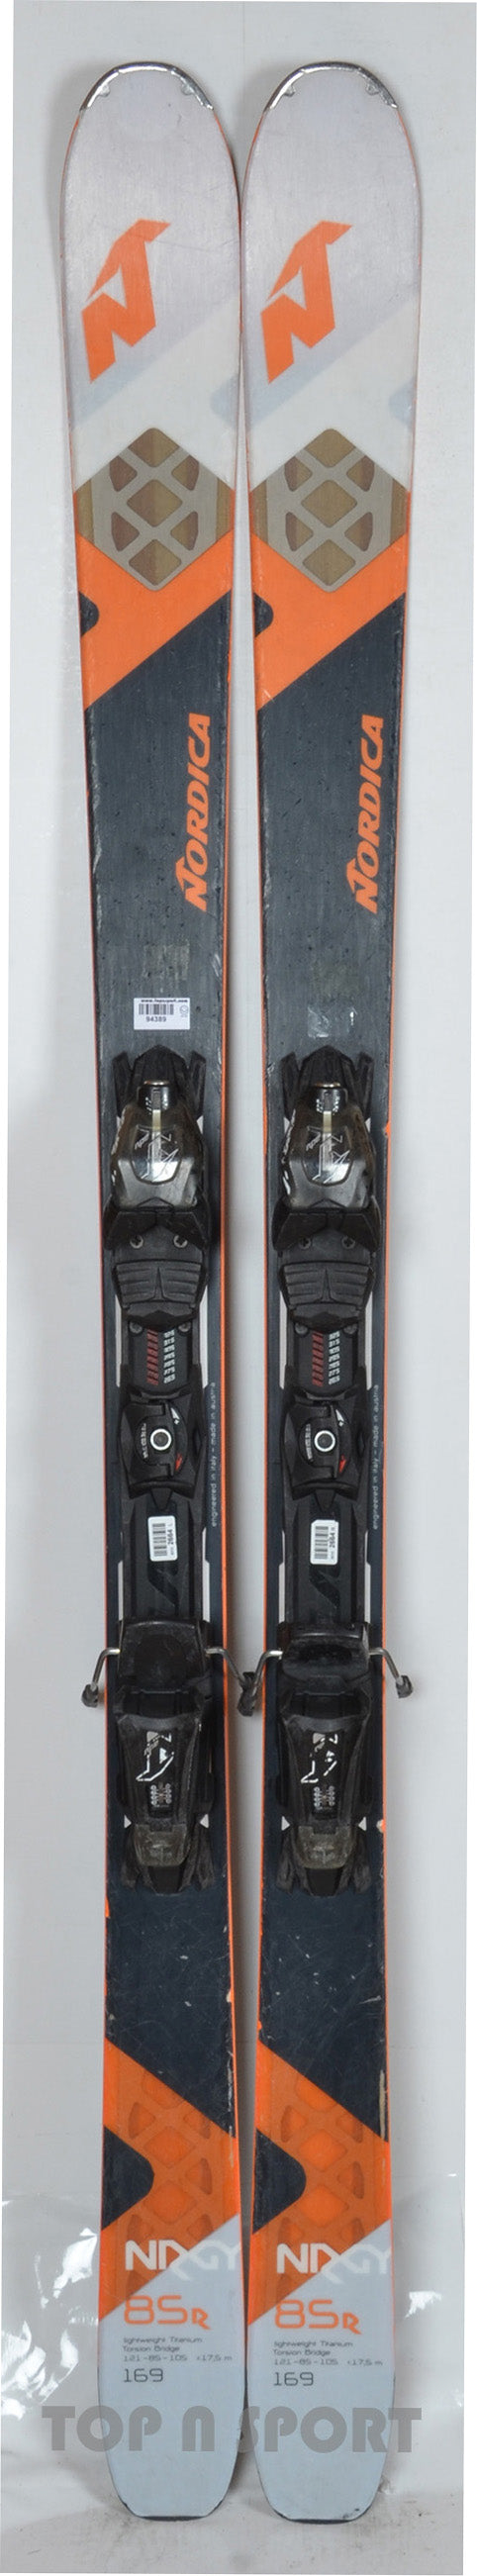 Nordica NRGY 85 R - skis d'occasion